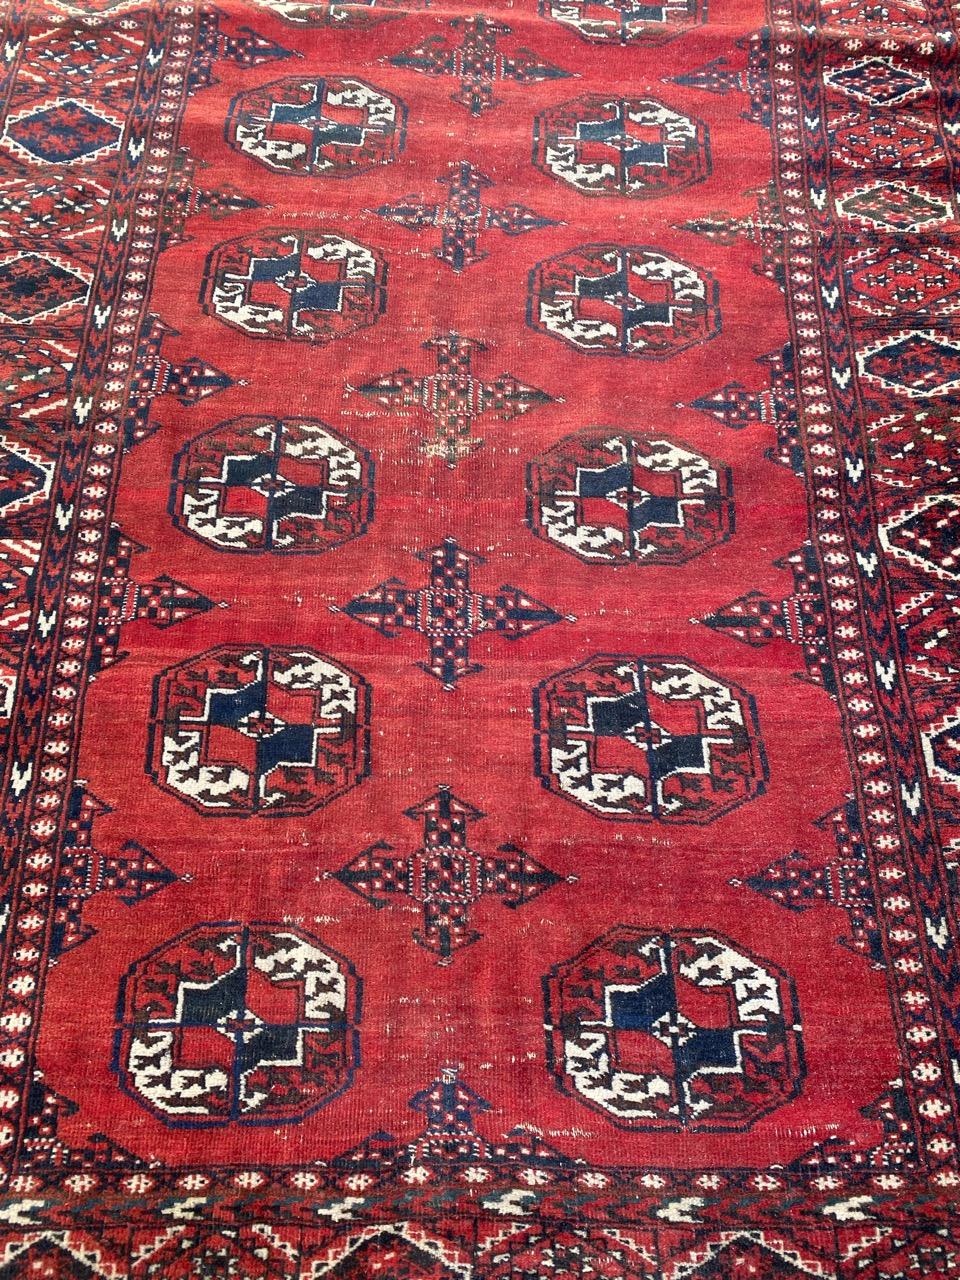 Nice Turkmen Afghan rug with beautiful Bokhara design and nice natural colors, entirely hand knotted with wool velvet on wool foundation.

✨✨✨
